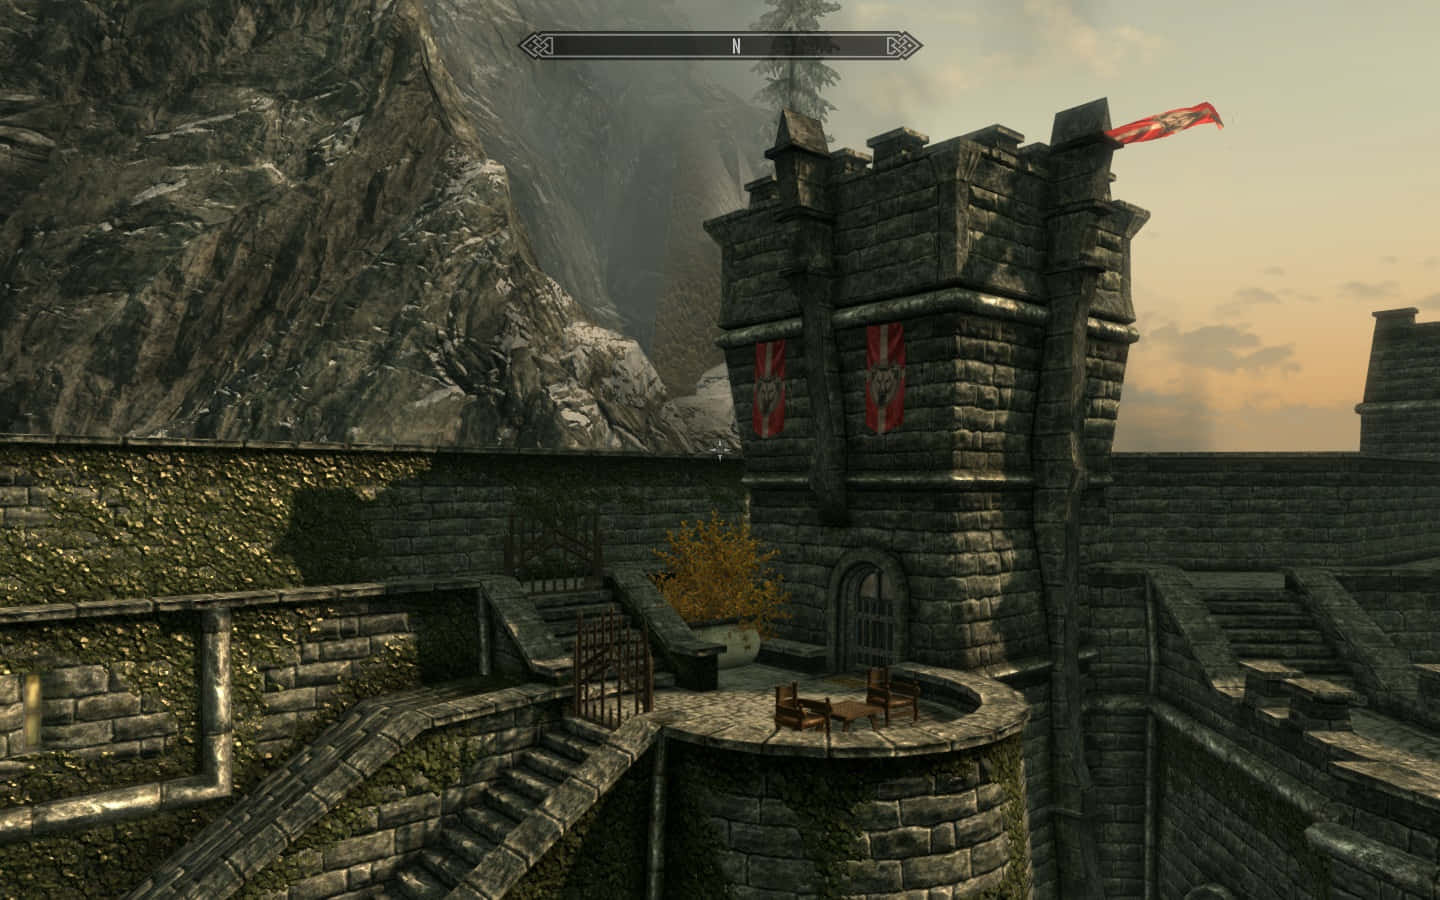 Stunning view of Solitude, the capital city of Skyrim, with its breathtaking architecture and scenic background. Wallpaper